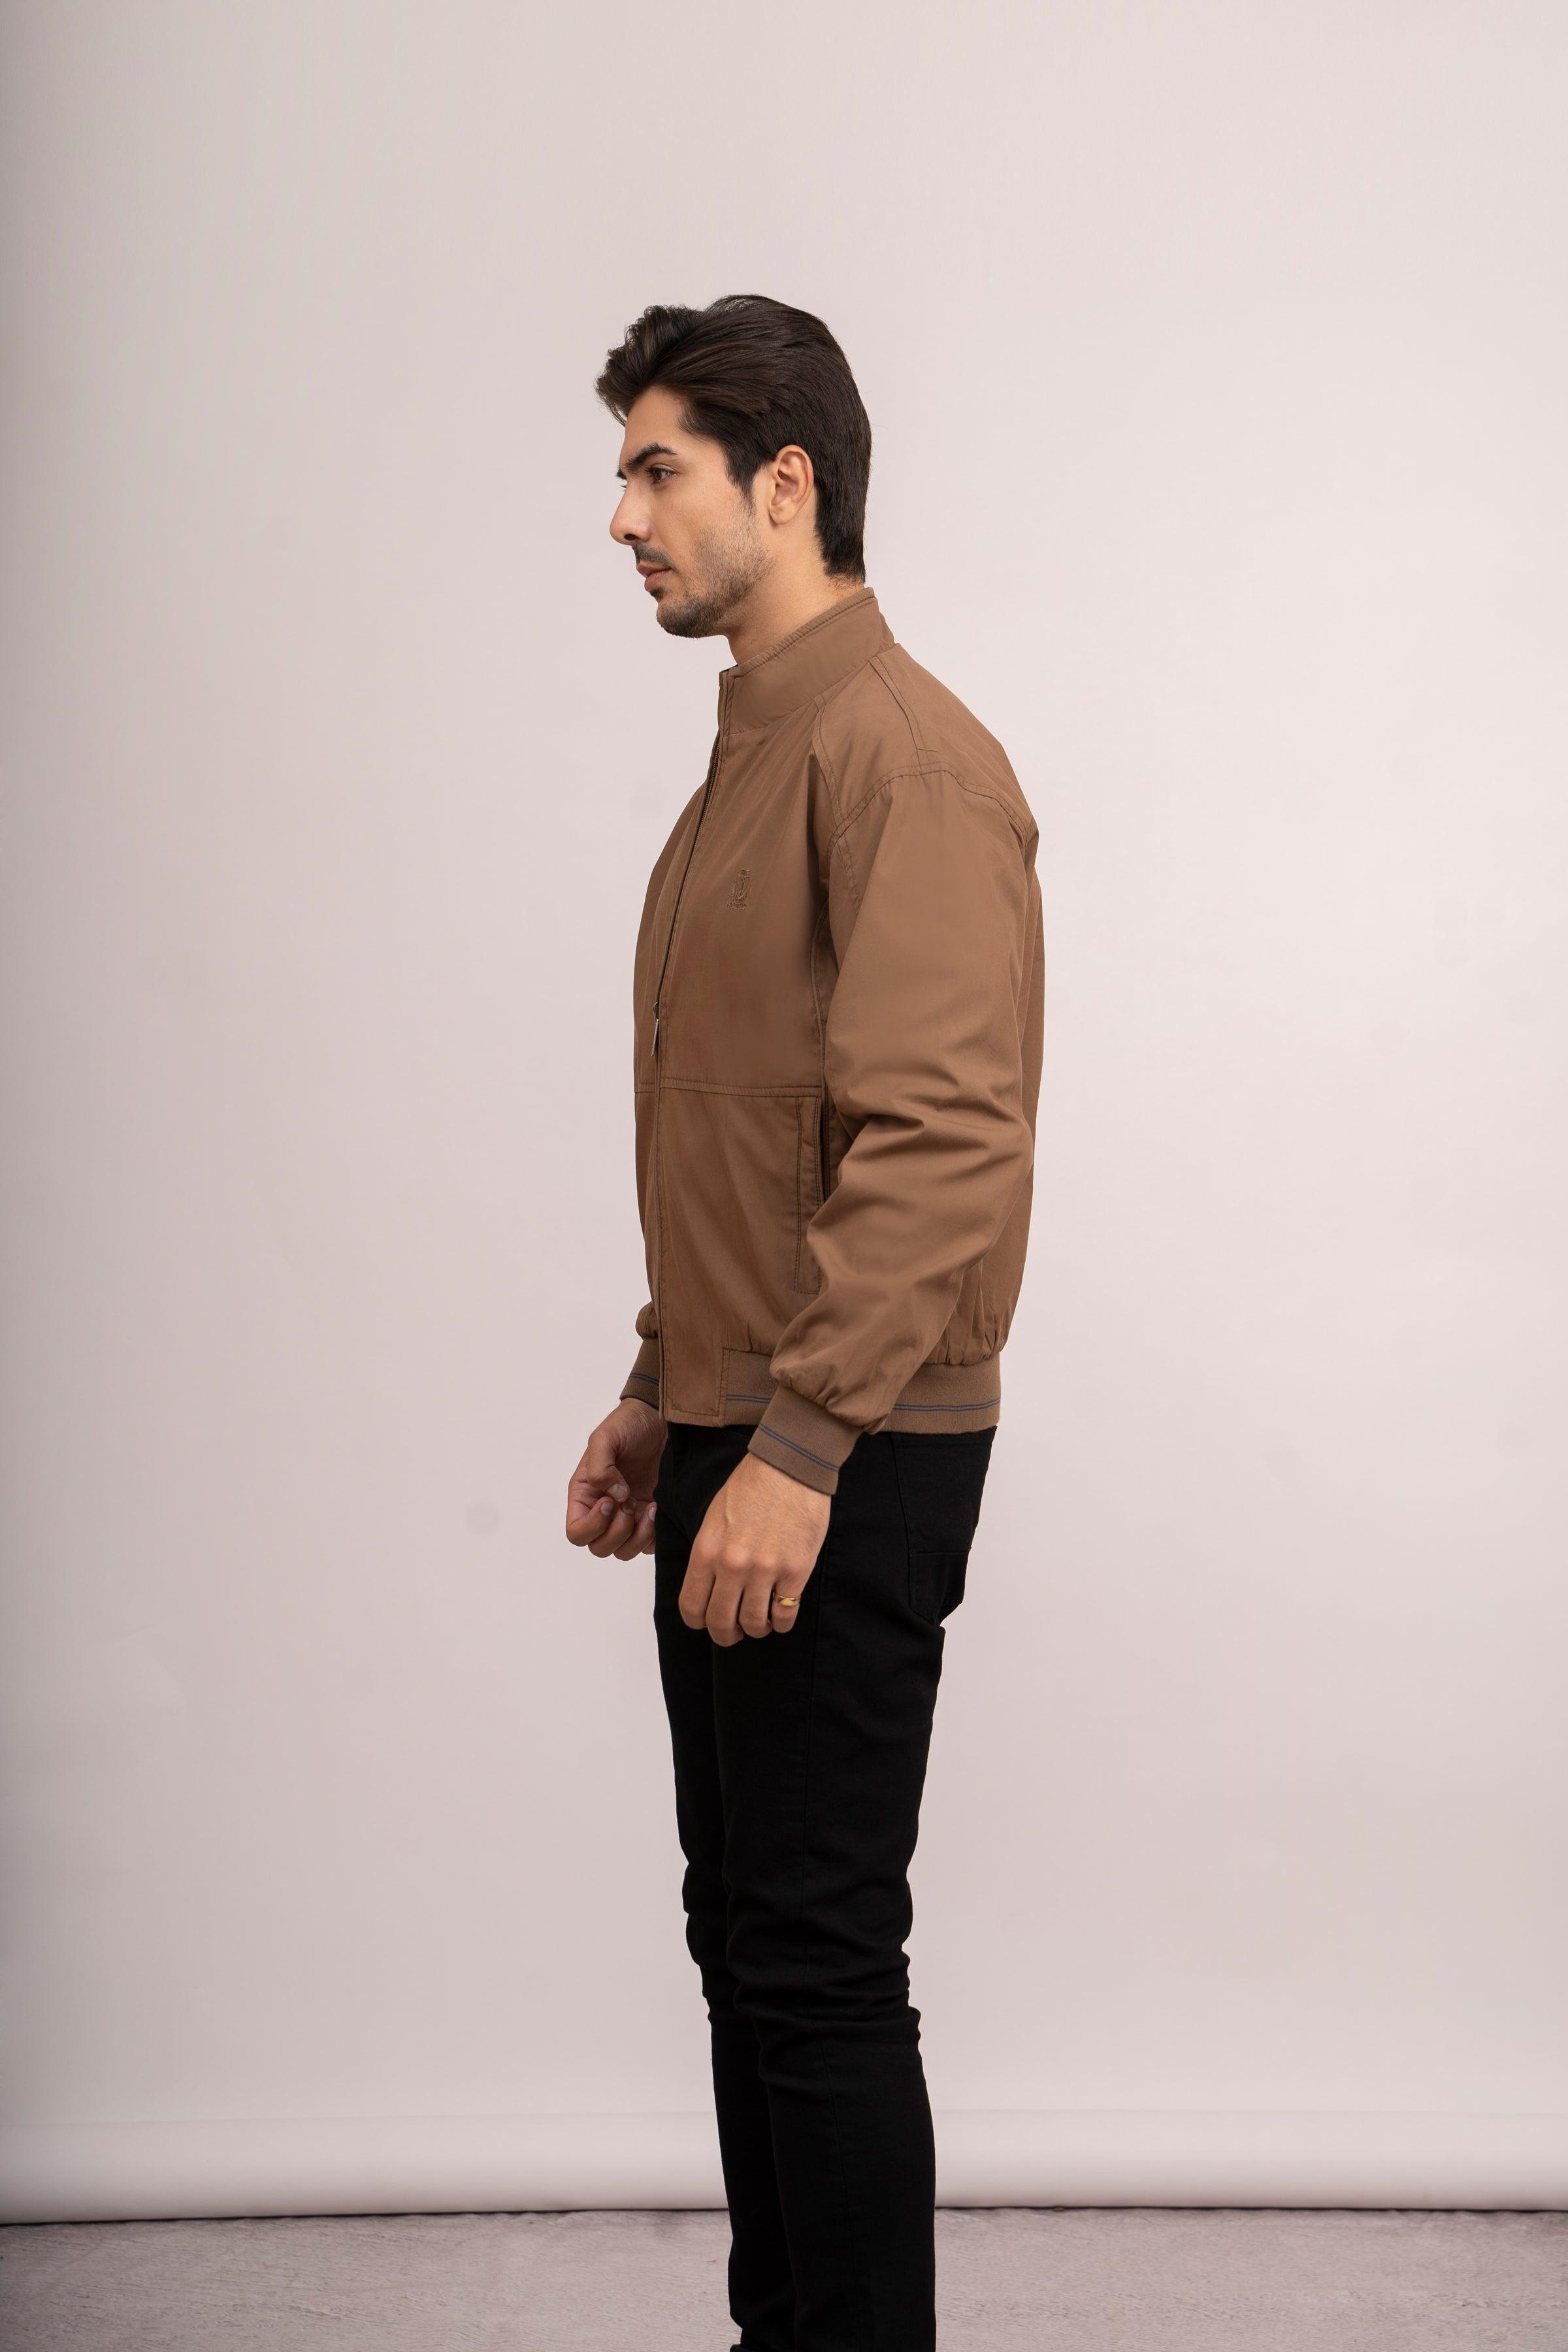 REVESIBLE JACKET F/S BROWN NAVY at Charcoal Clothing